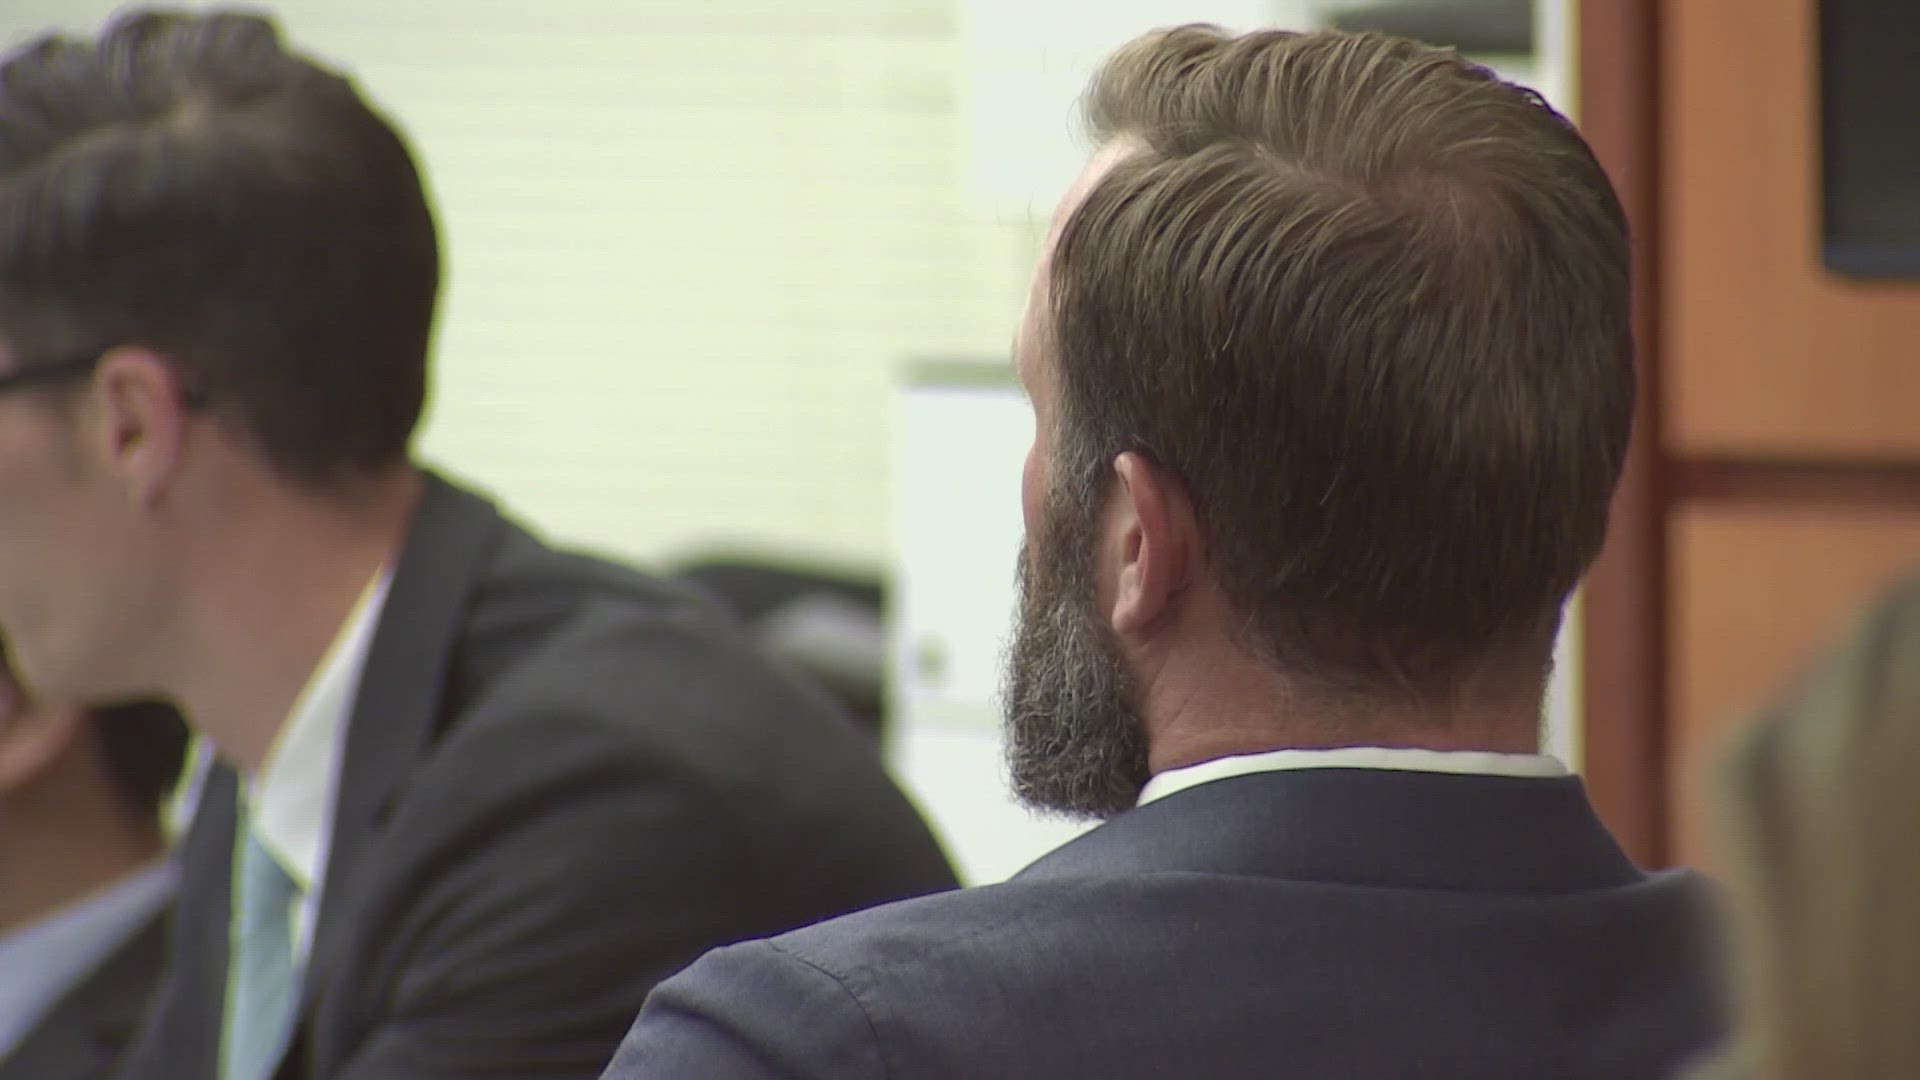 The defense for three Tacoma police officers on trial for the death of Manuel Ellis presented their first witnesses on Monday morning.